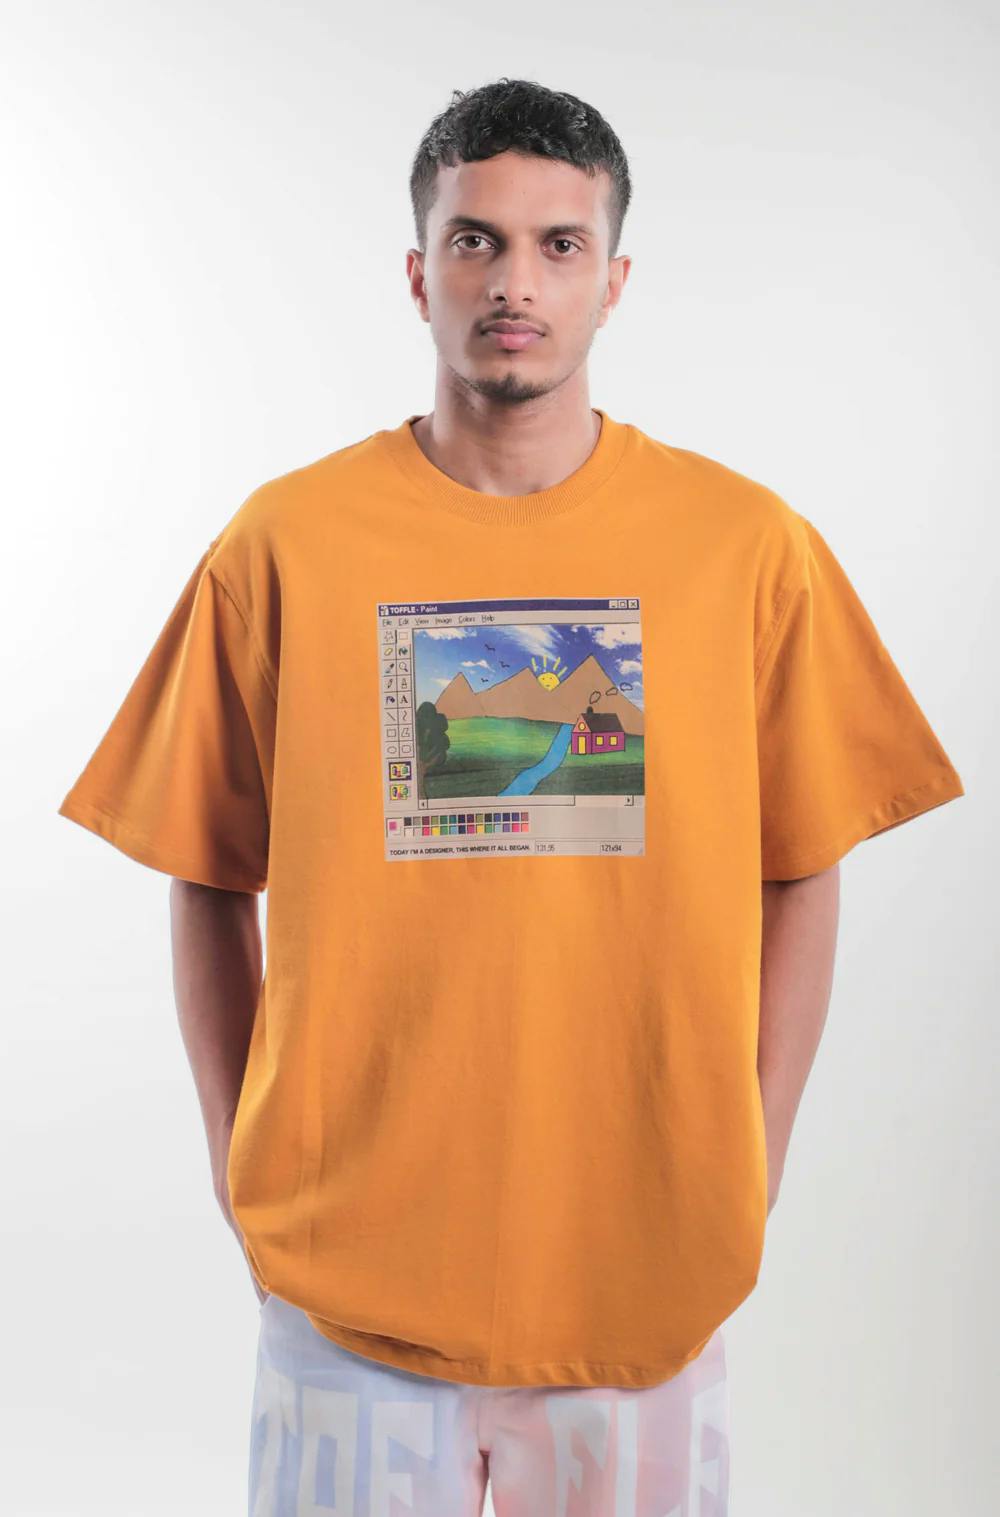 Windows BG T-shirt, a product by TOFFLE